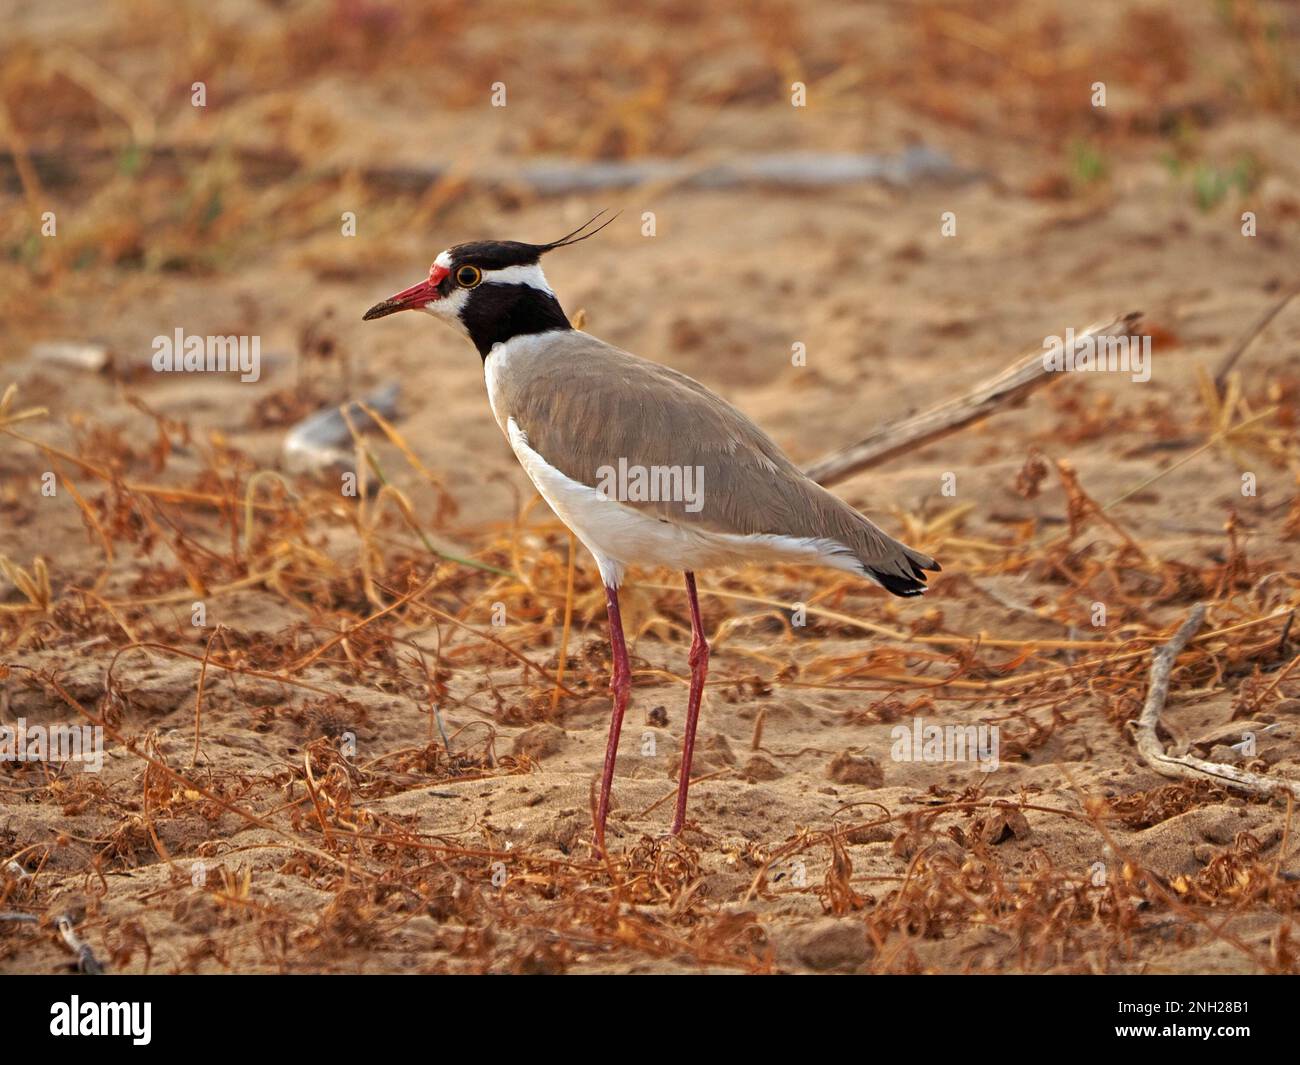 profile portrait of black-headed lapwing or black-headed plover (Vanellus tectus) on arid sandy ground with parched grass Galana province,Kenya,Africa Stock Photo